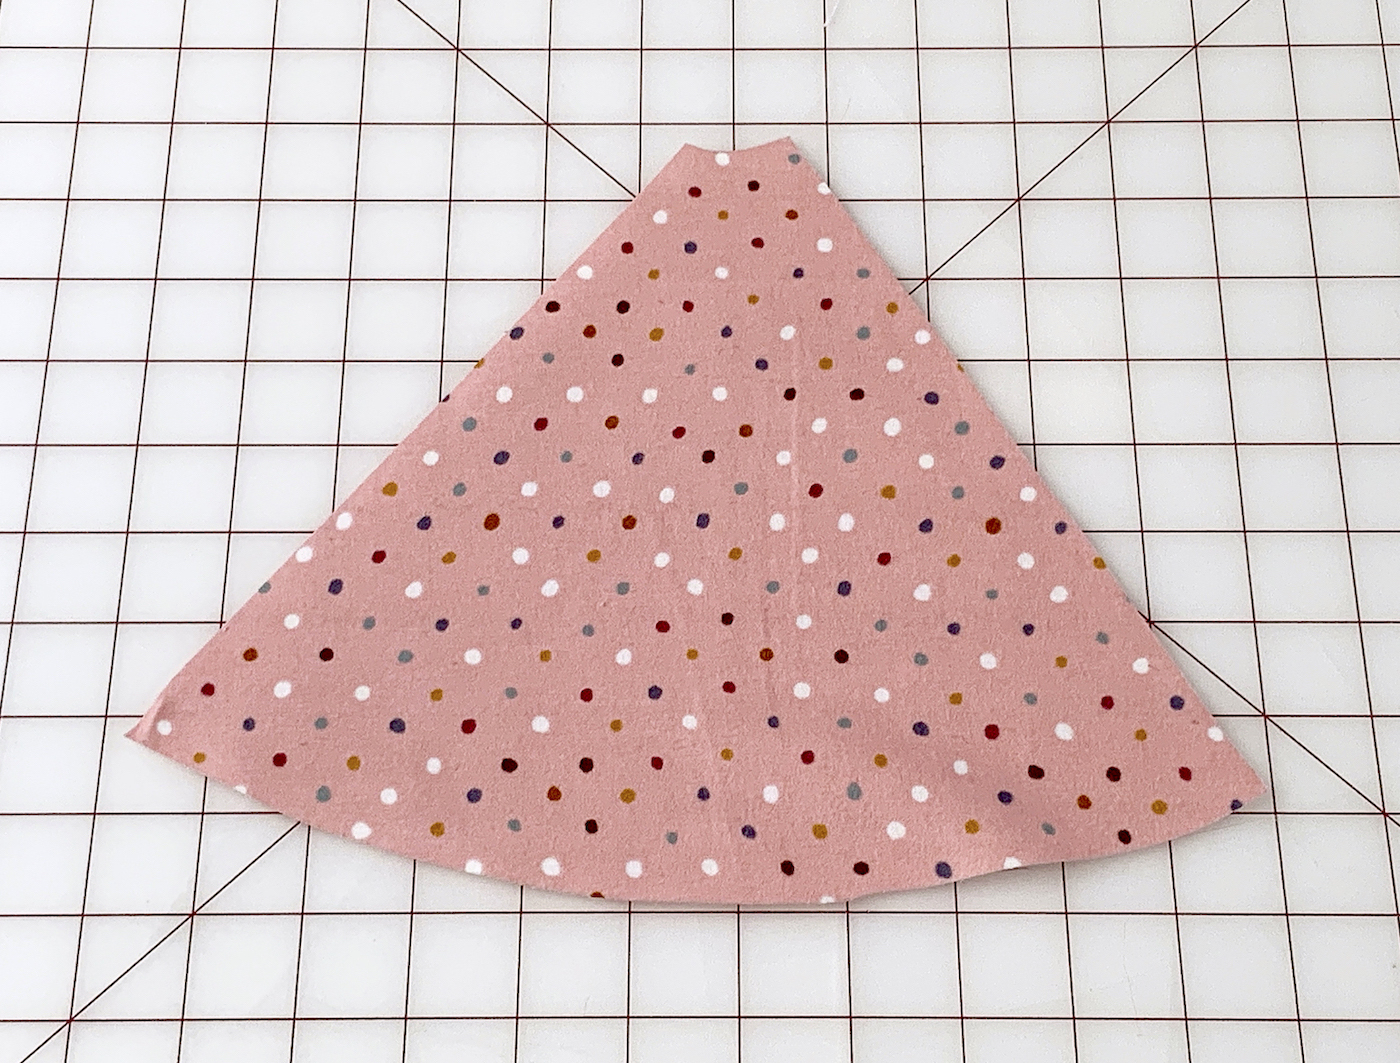 Cut polka dot flannel fabric piece laying on the cutting mat